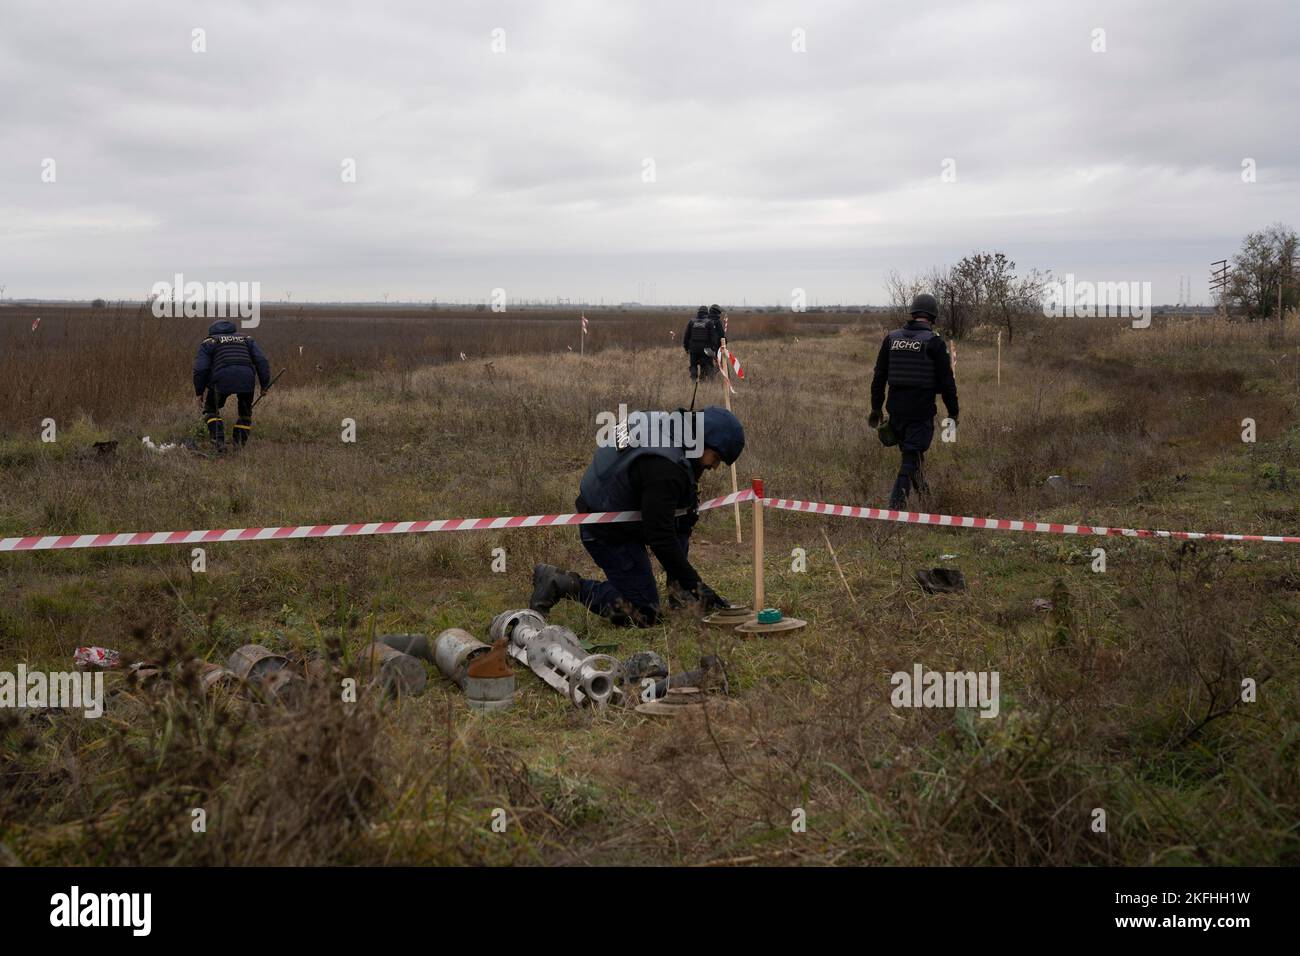 An investigator seen putting down an anti-tank mine during the process of demining. Since the liberation of Ukraine southern regional capital Kherson, the Ukrainian government has been working intensively on removing land mines in the liberated territory. Around 5000 explosives have been found and destroyed since the liberation. With the lack of sufficient robotics, the de-mining process is conducted manually and that would take at least several months to clean up the whole of Kherson city. (Photo by Ashley Chan/SOPA Images/Sipa USA) Stock Photo